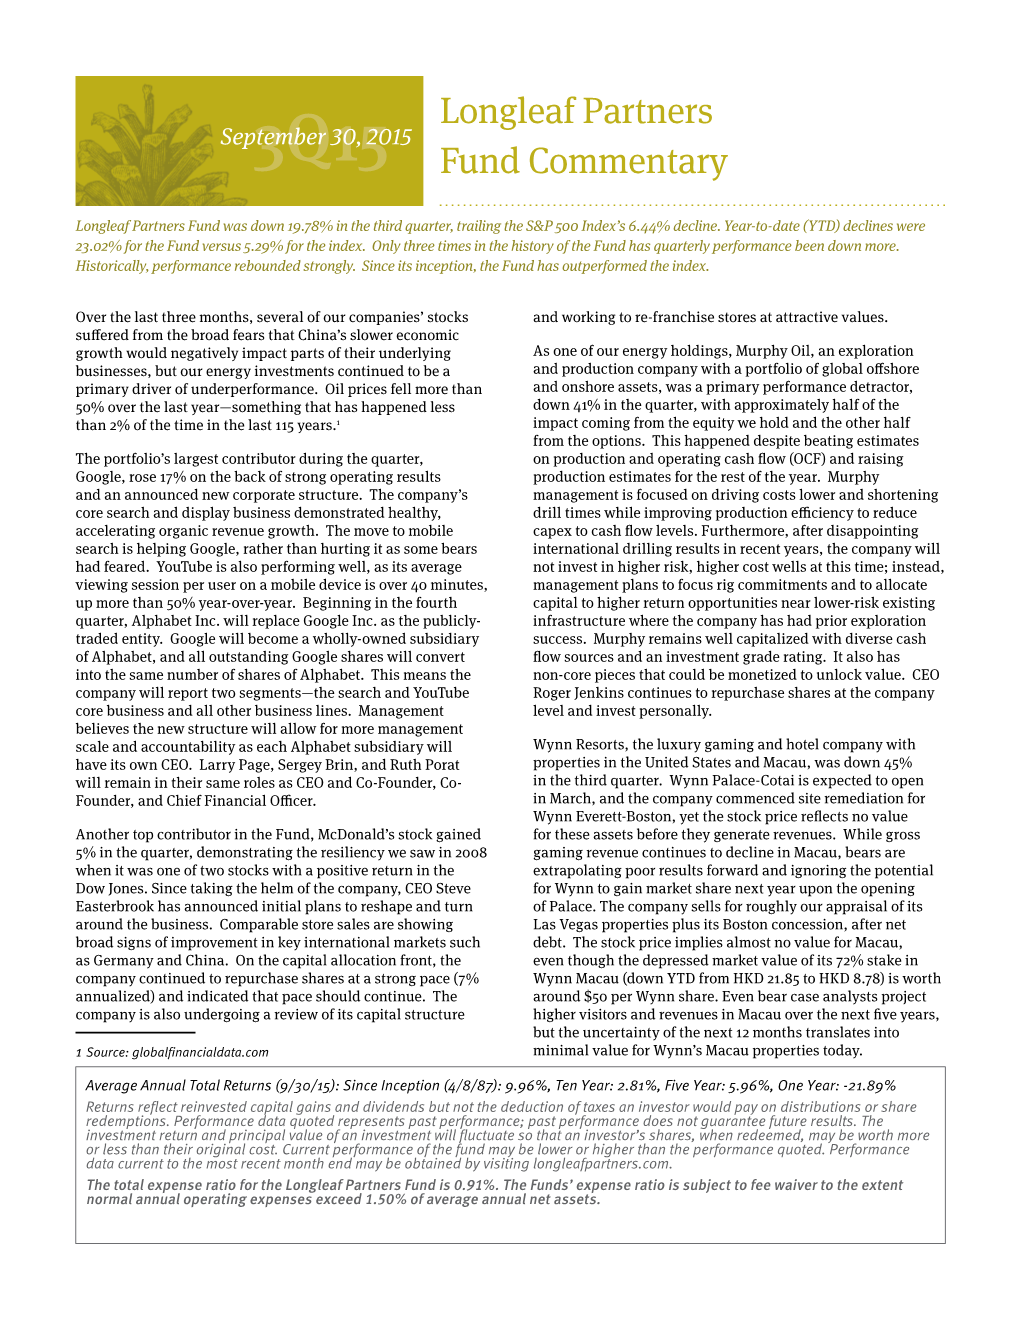 Longleaf Partners Fund Commentary